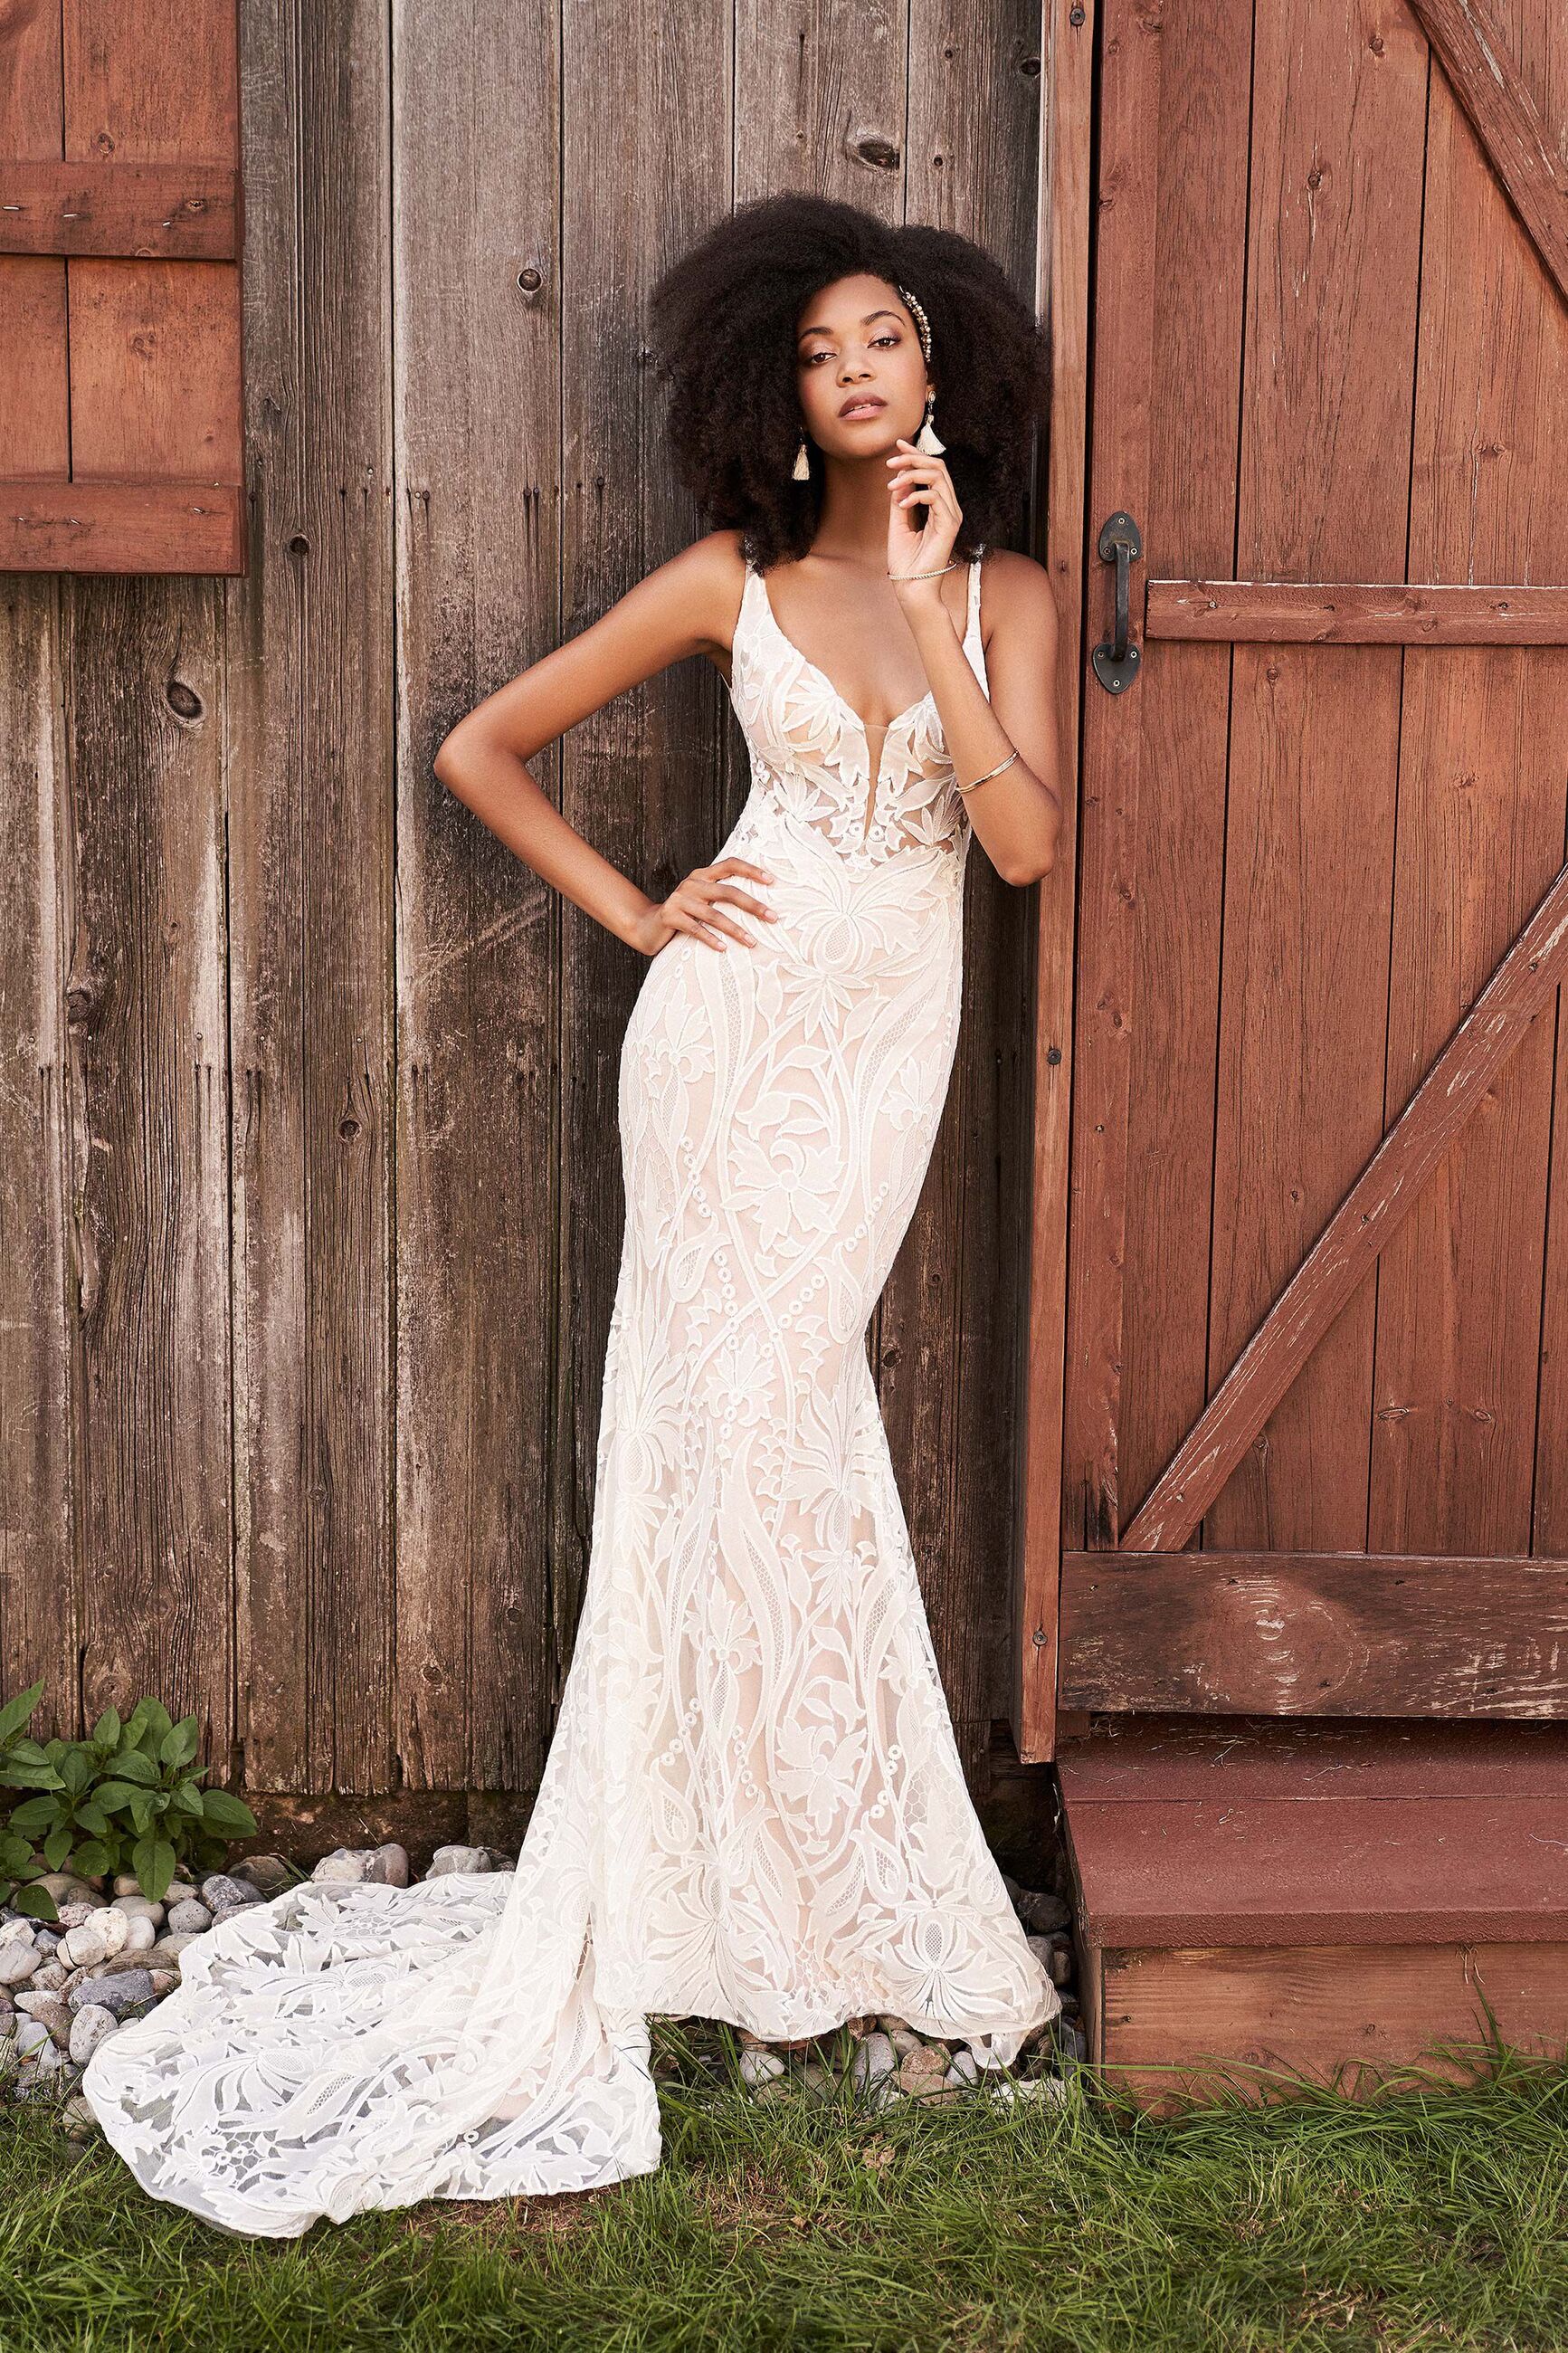 Paisley Lace Overlay Lace Up Gown Wedding Fashion Dress 